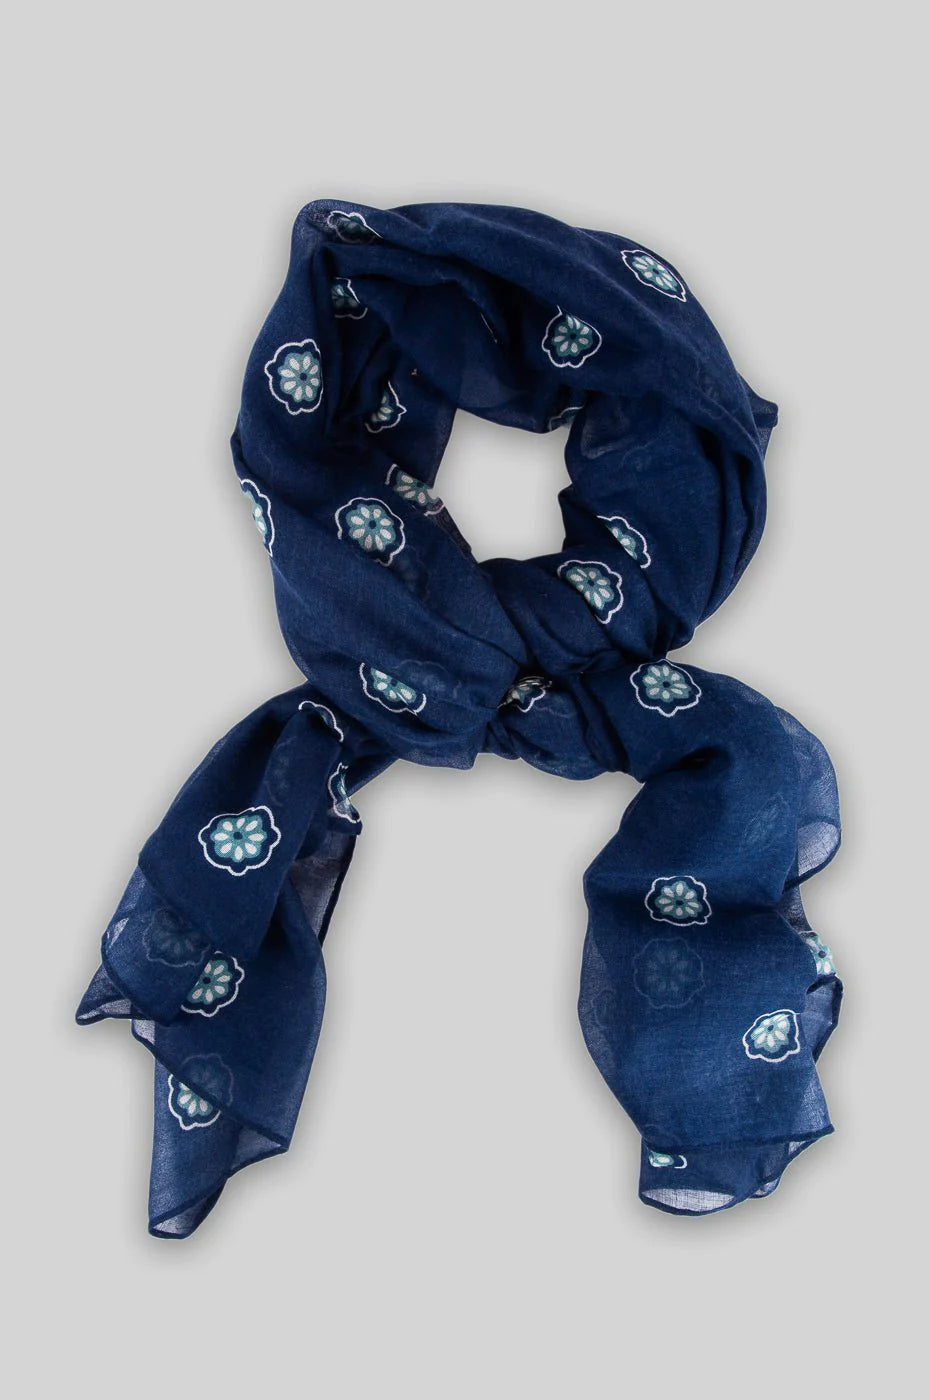 Shop Unisex Patterened Scarf in Navy or browse our range of scarves for men and women in a variety of colours in-store at Aliverti Cape Town, or shop online. We deliver in South Africa & offer multiple payment plans as well as accept multiple safe & secure payment methods.